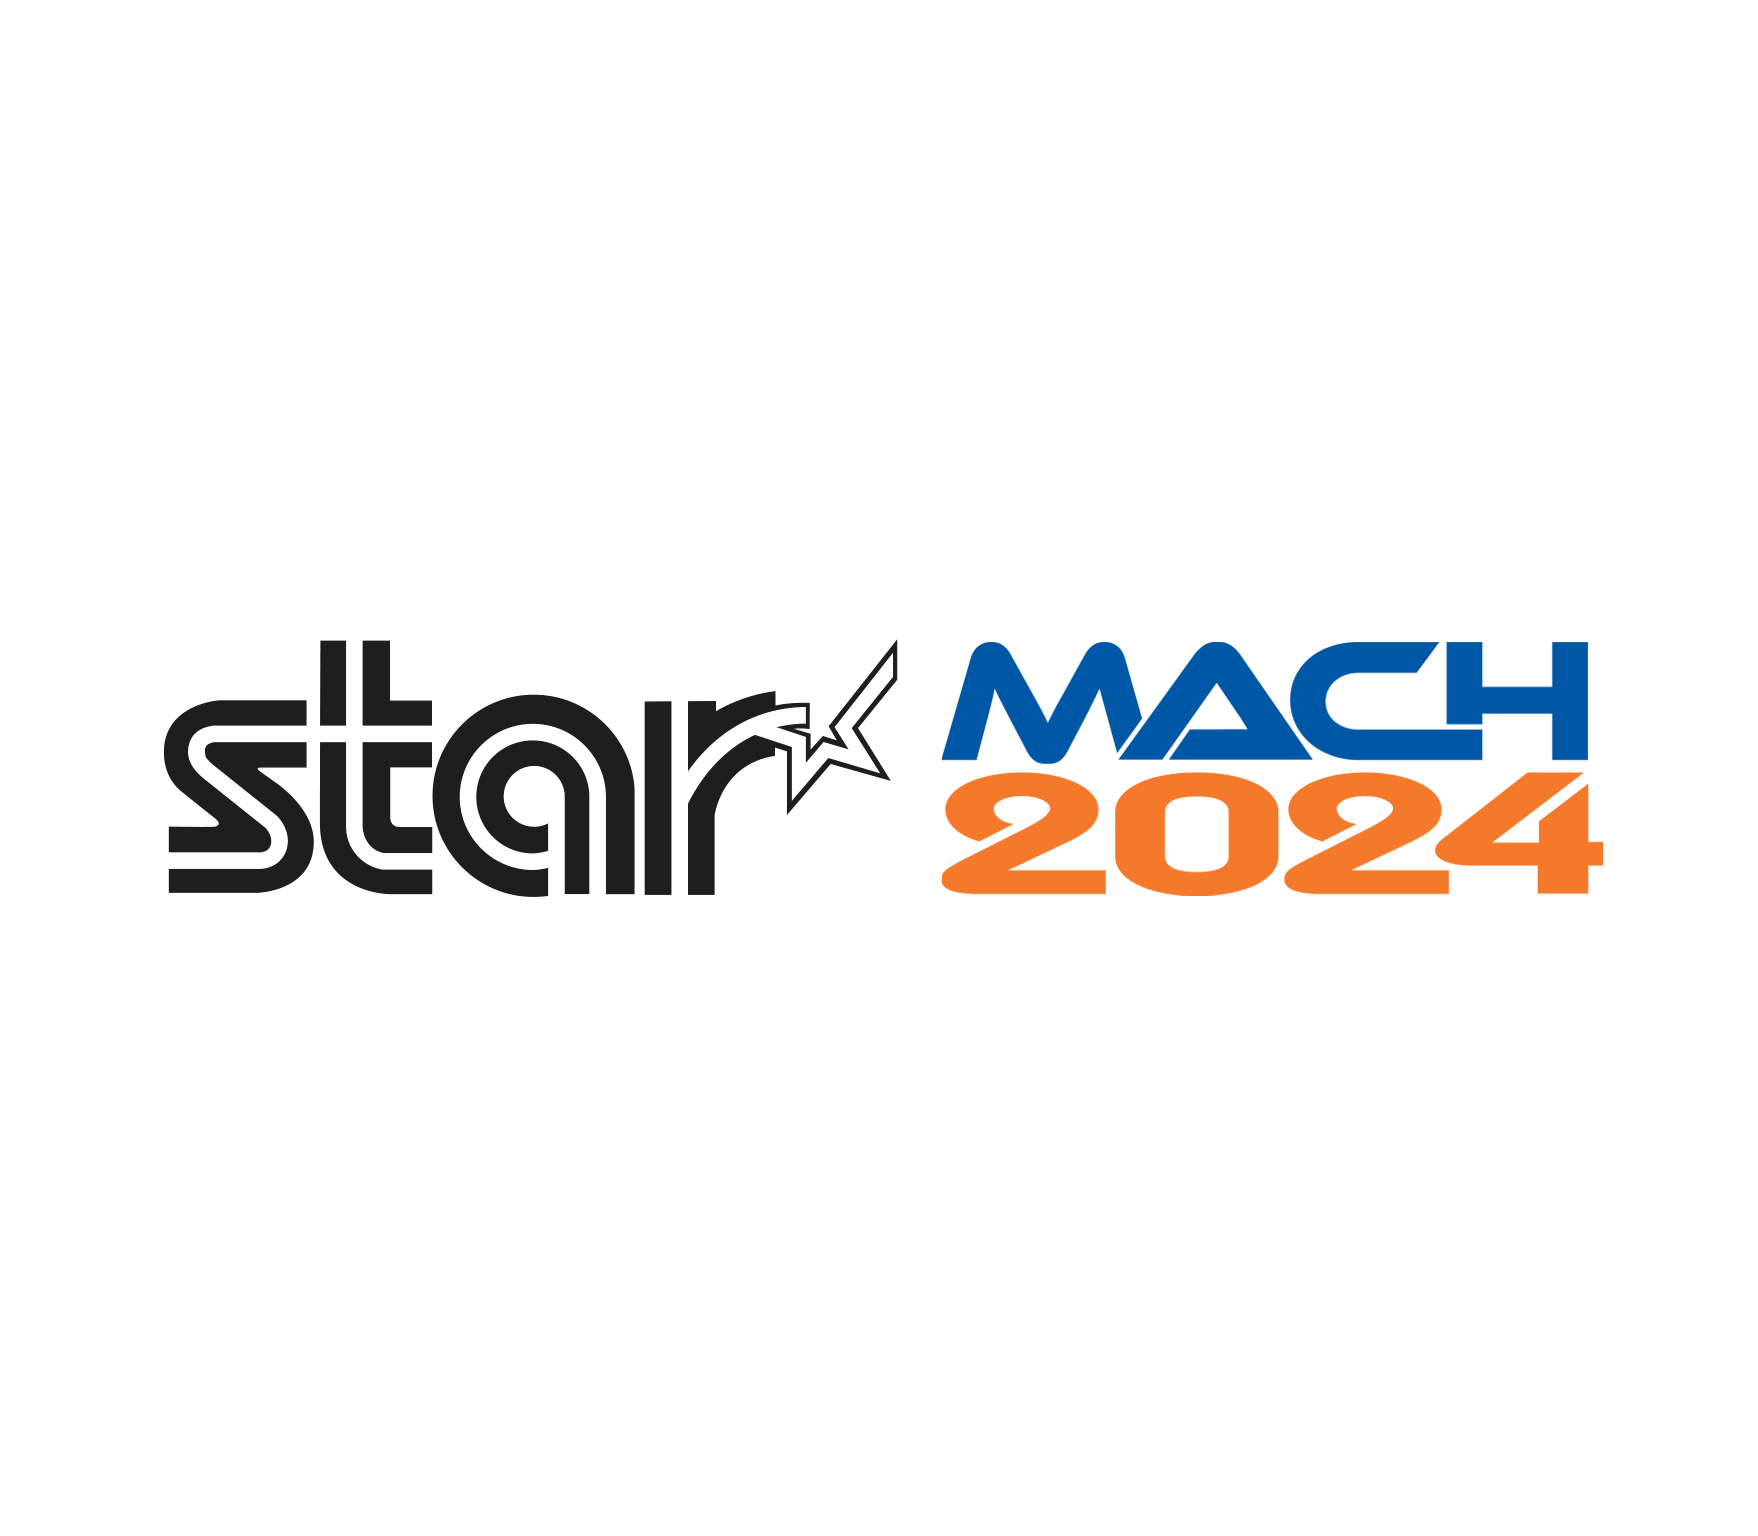 The stars of the show: The future of sliding head lathe production solutions to be demonstrated by Star GB at MACH Exhibition 2024